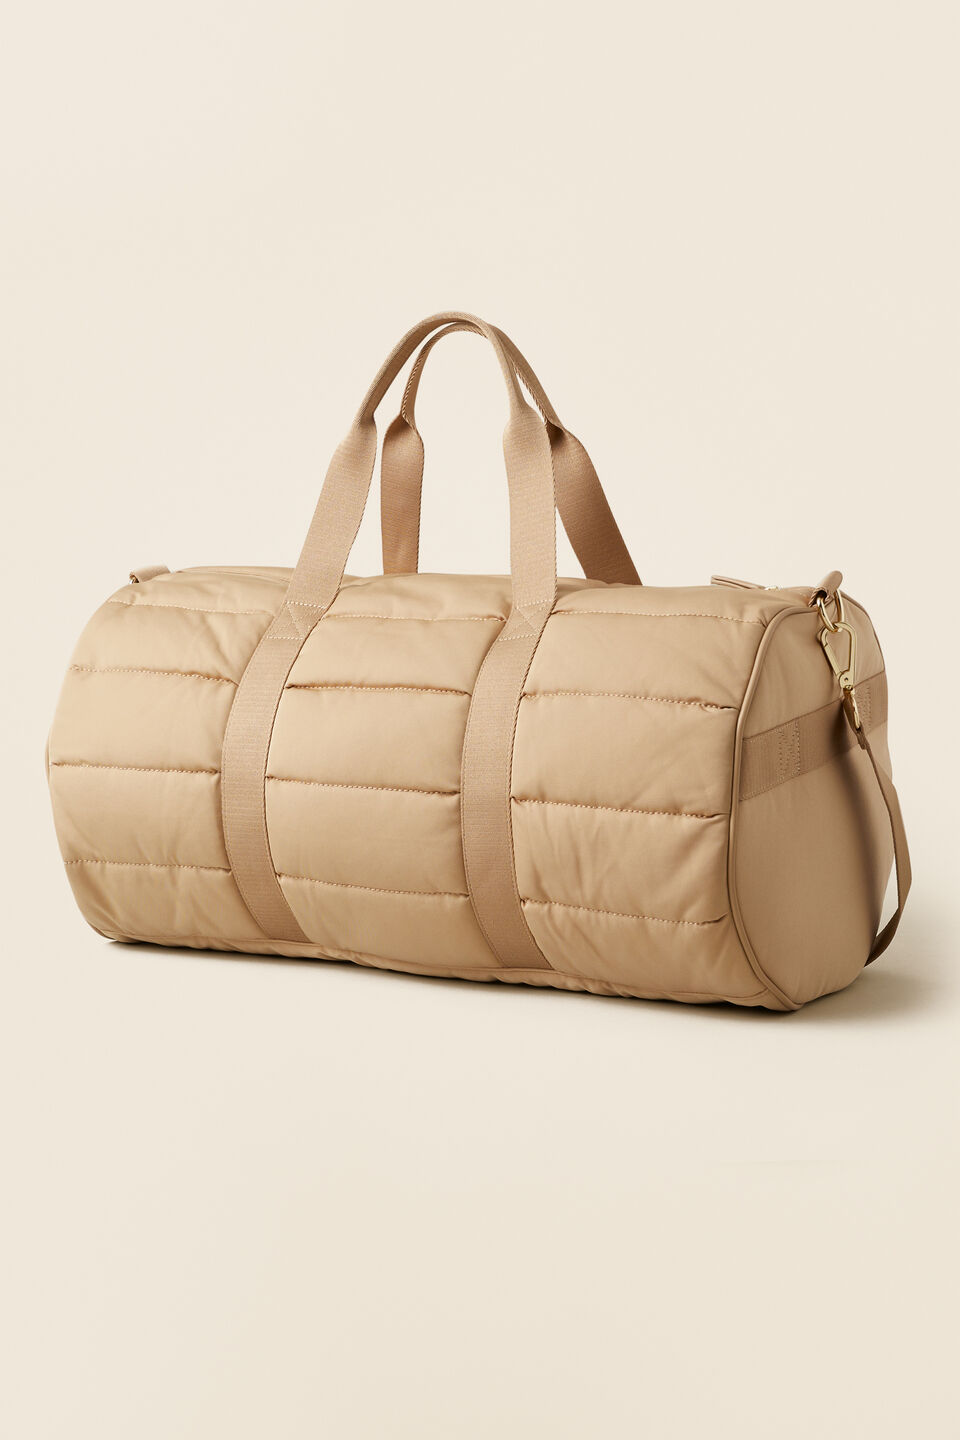 Quilted Leisure Duffle Bag  Champagne Beige